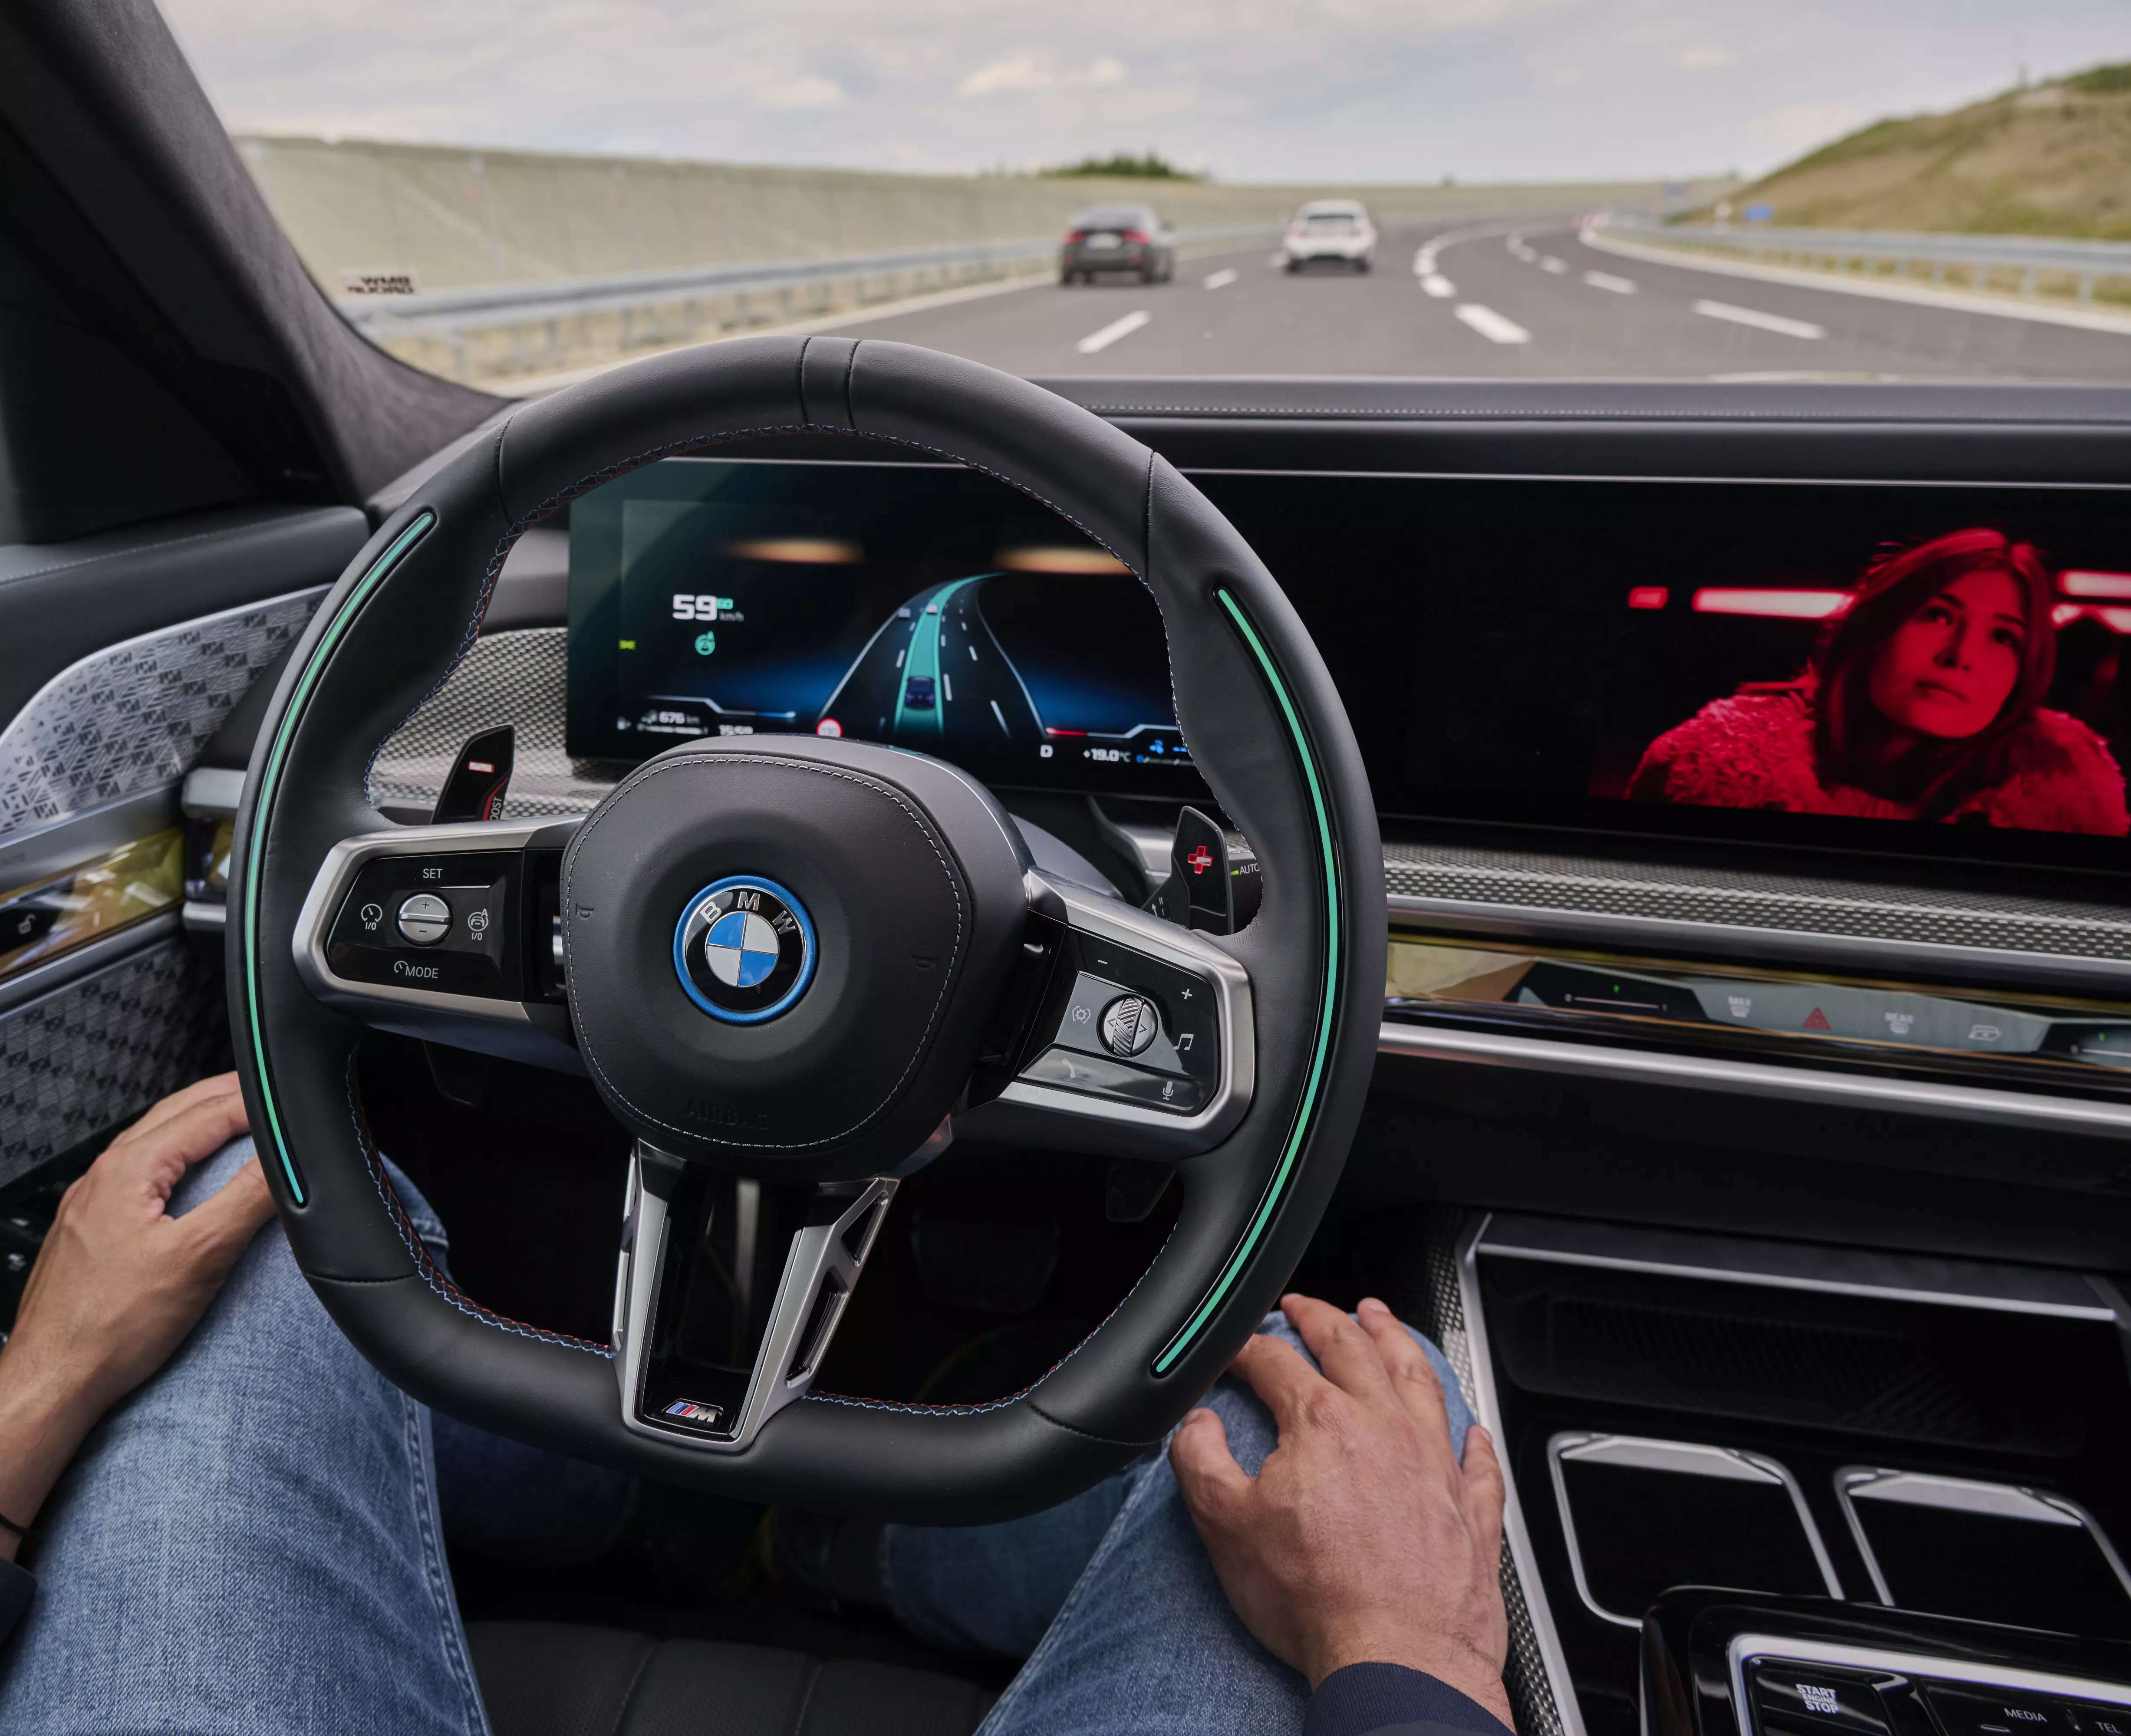 <p>Designed to assume the entire task of driving with Level 3 capability as defined by the Society of Automotive Engineers (SAE), the highly automated driving function will be offered exclusively in Germany priced at EUR 6,000 (incl. VAT).</p>